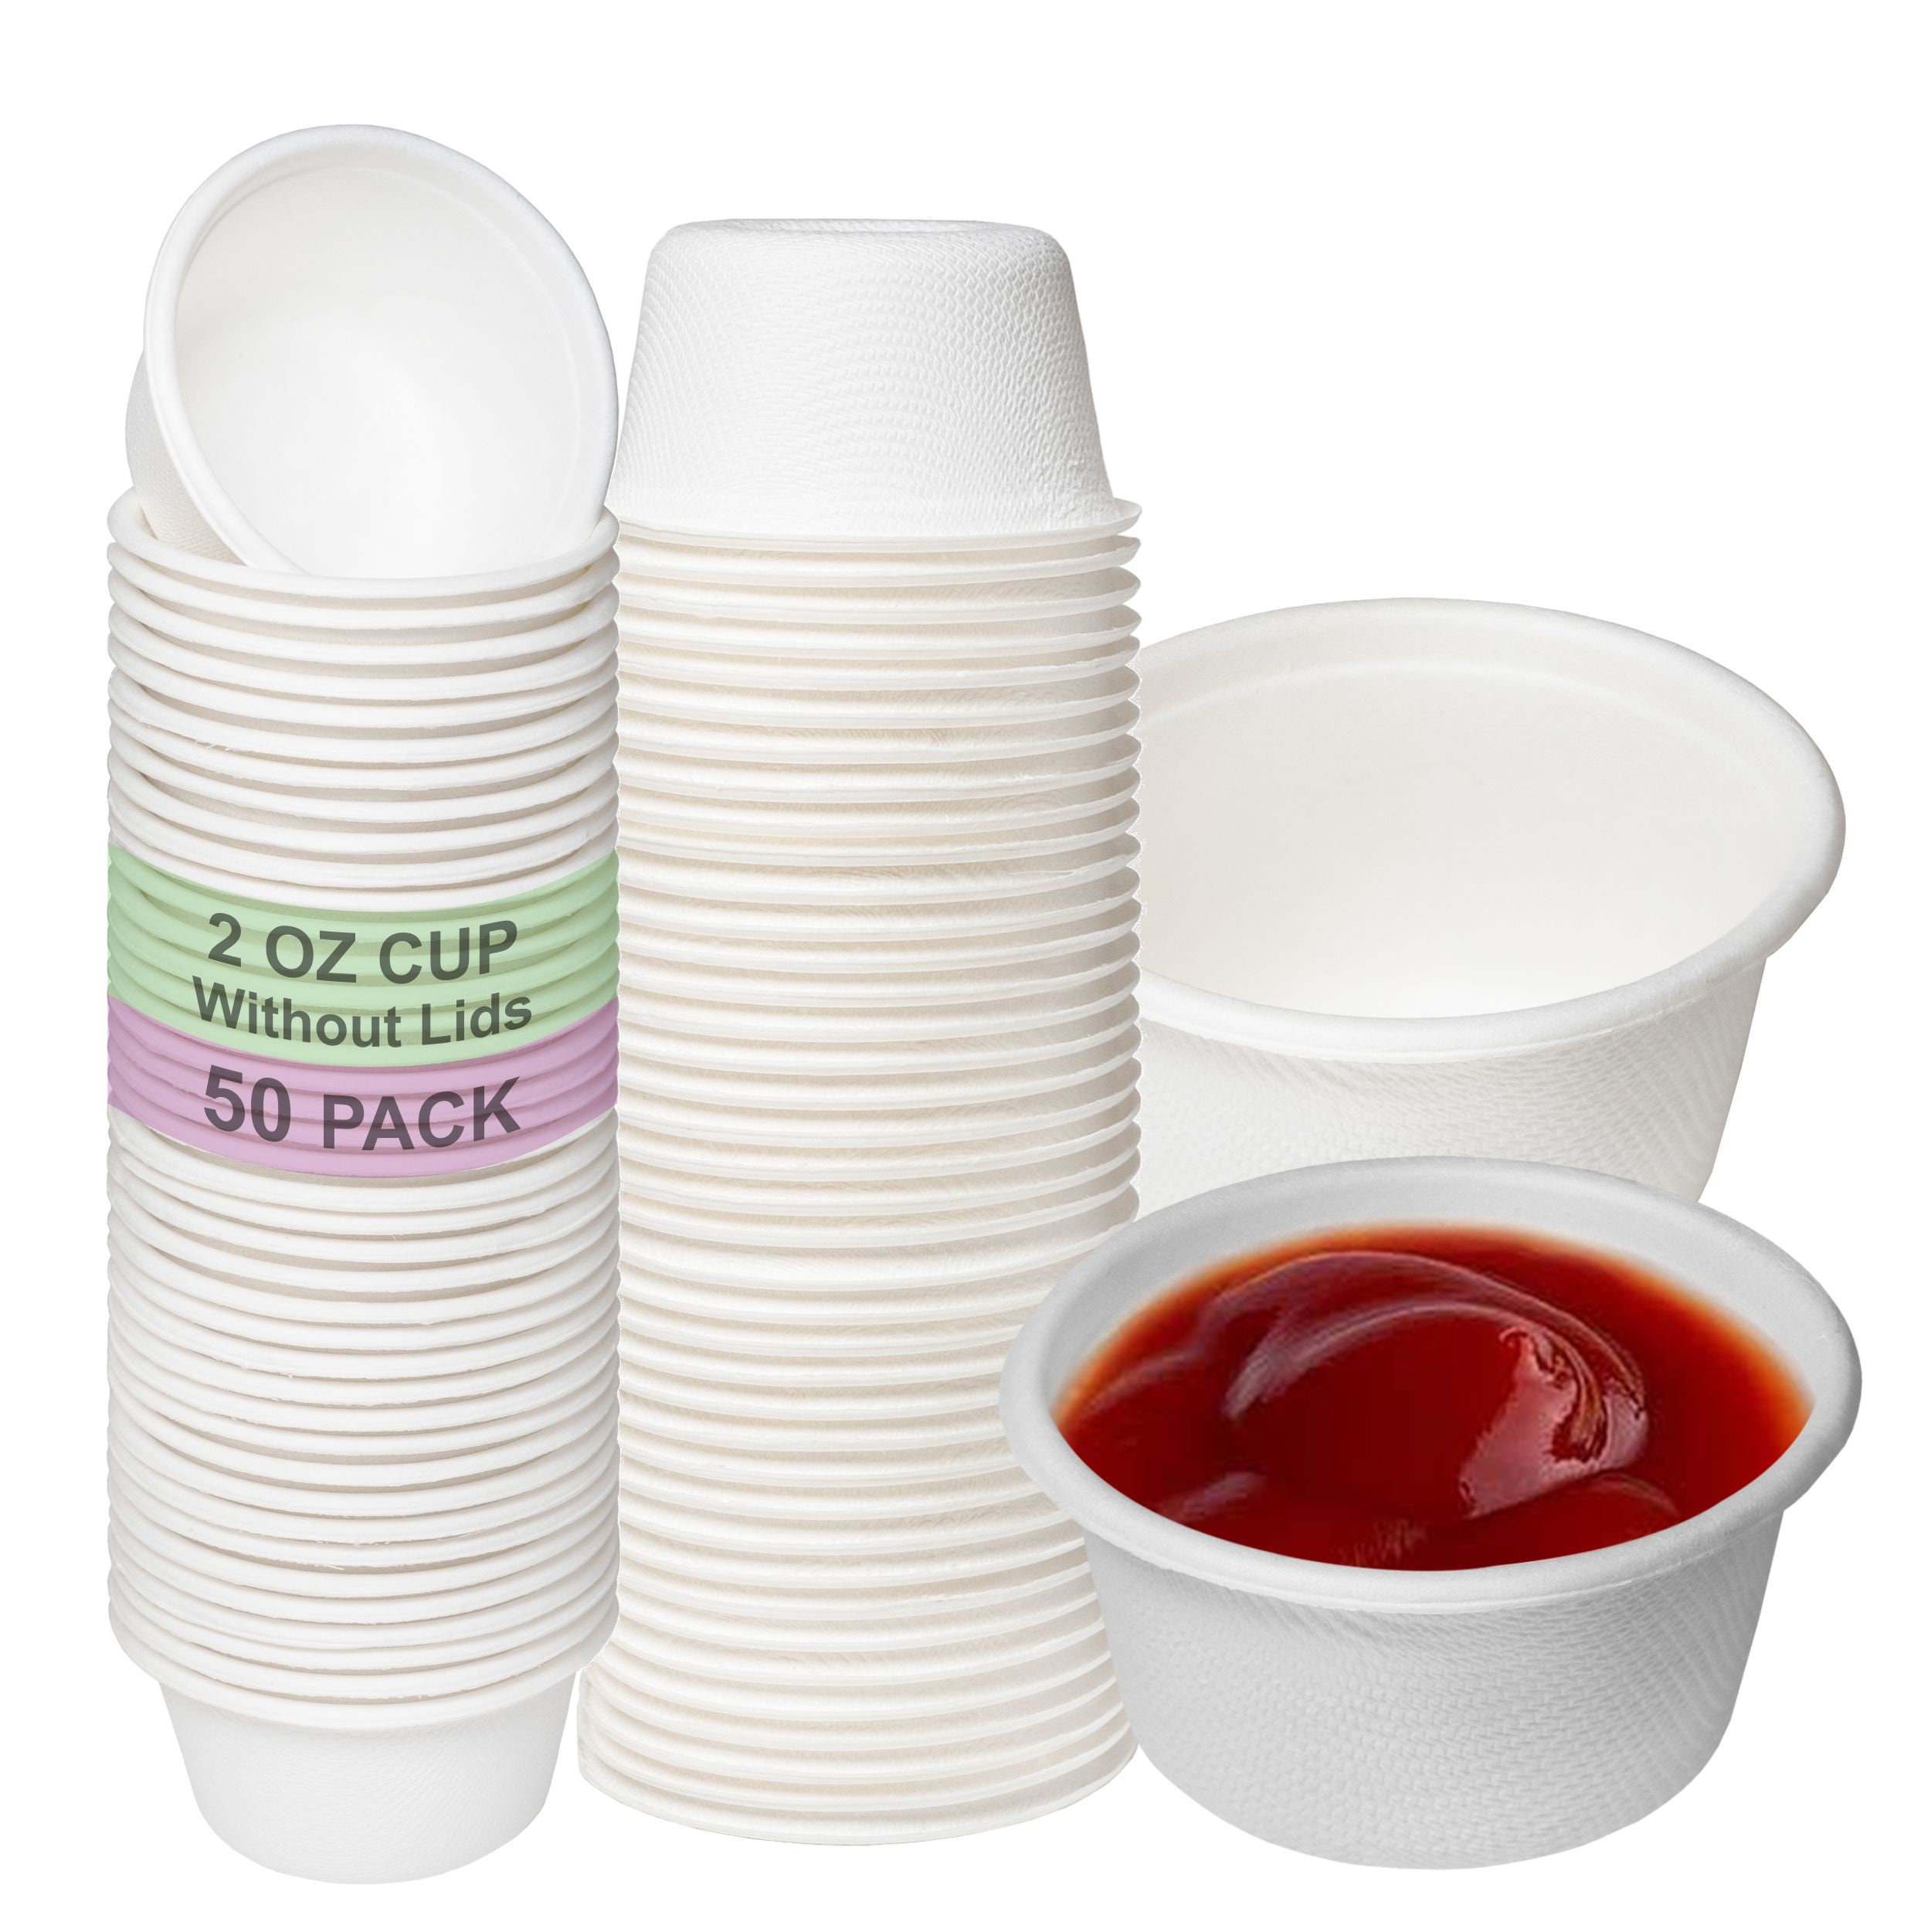 Small Treated Paper Soufflé White Portion Cups 20 Sleeves of 250 Cups, 5000  Count Of 3/4 oz Cups, Sauce Or Liquid Cups, Dental Or Favor Cups